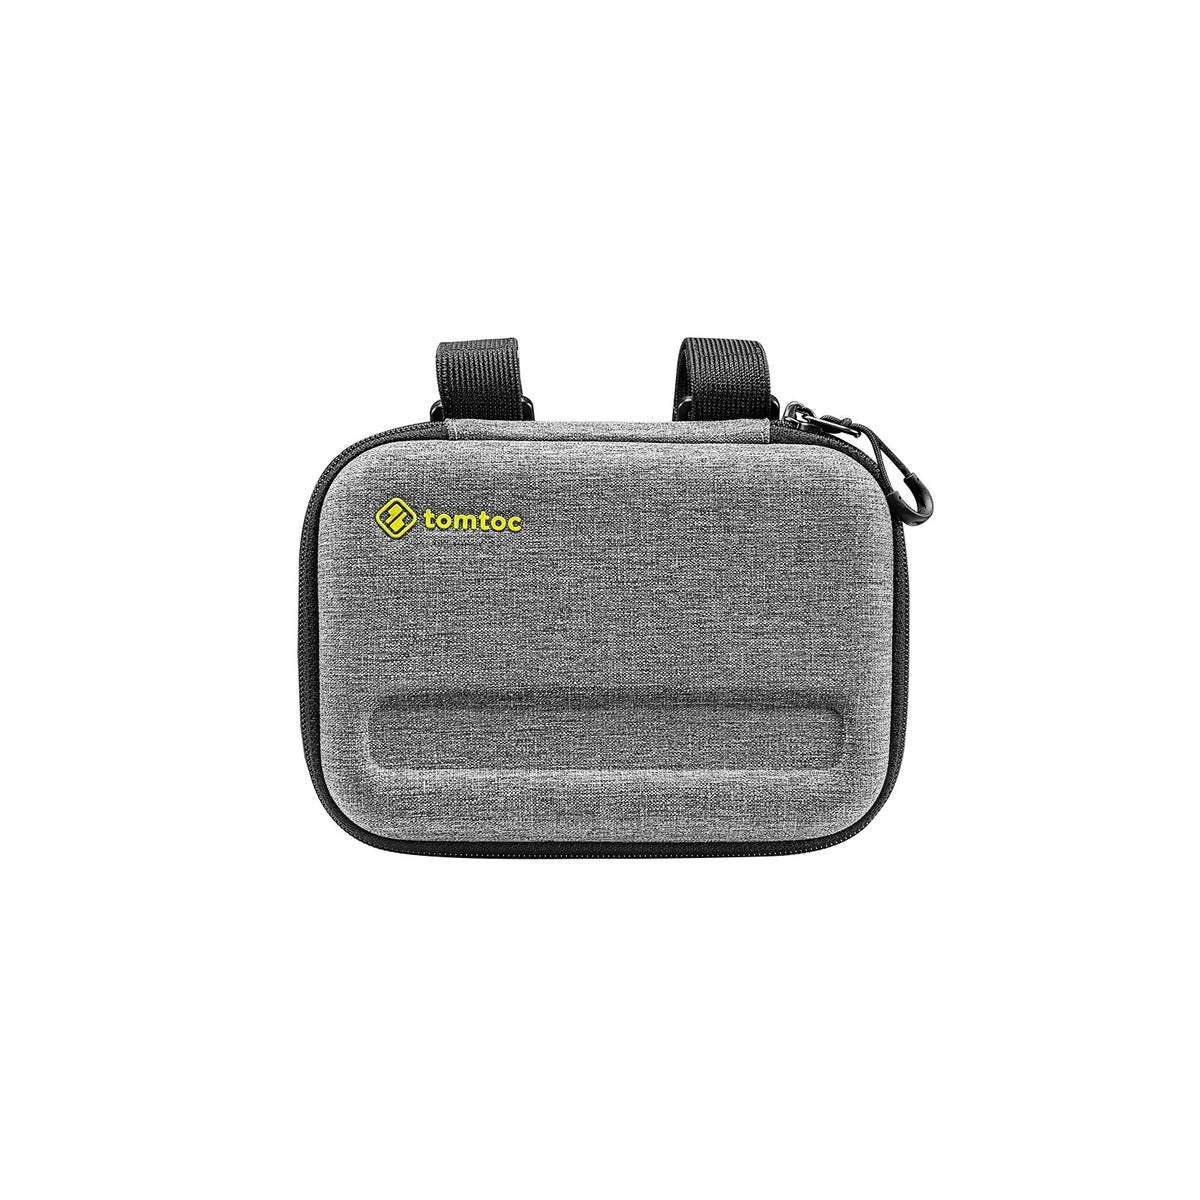 primary_tomtoc Carry Case for GoPro and Accessories｜Grey